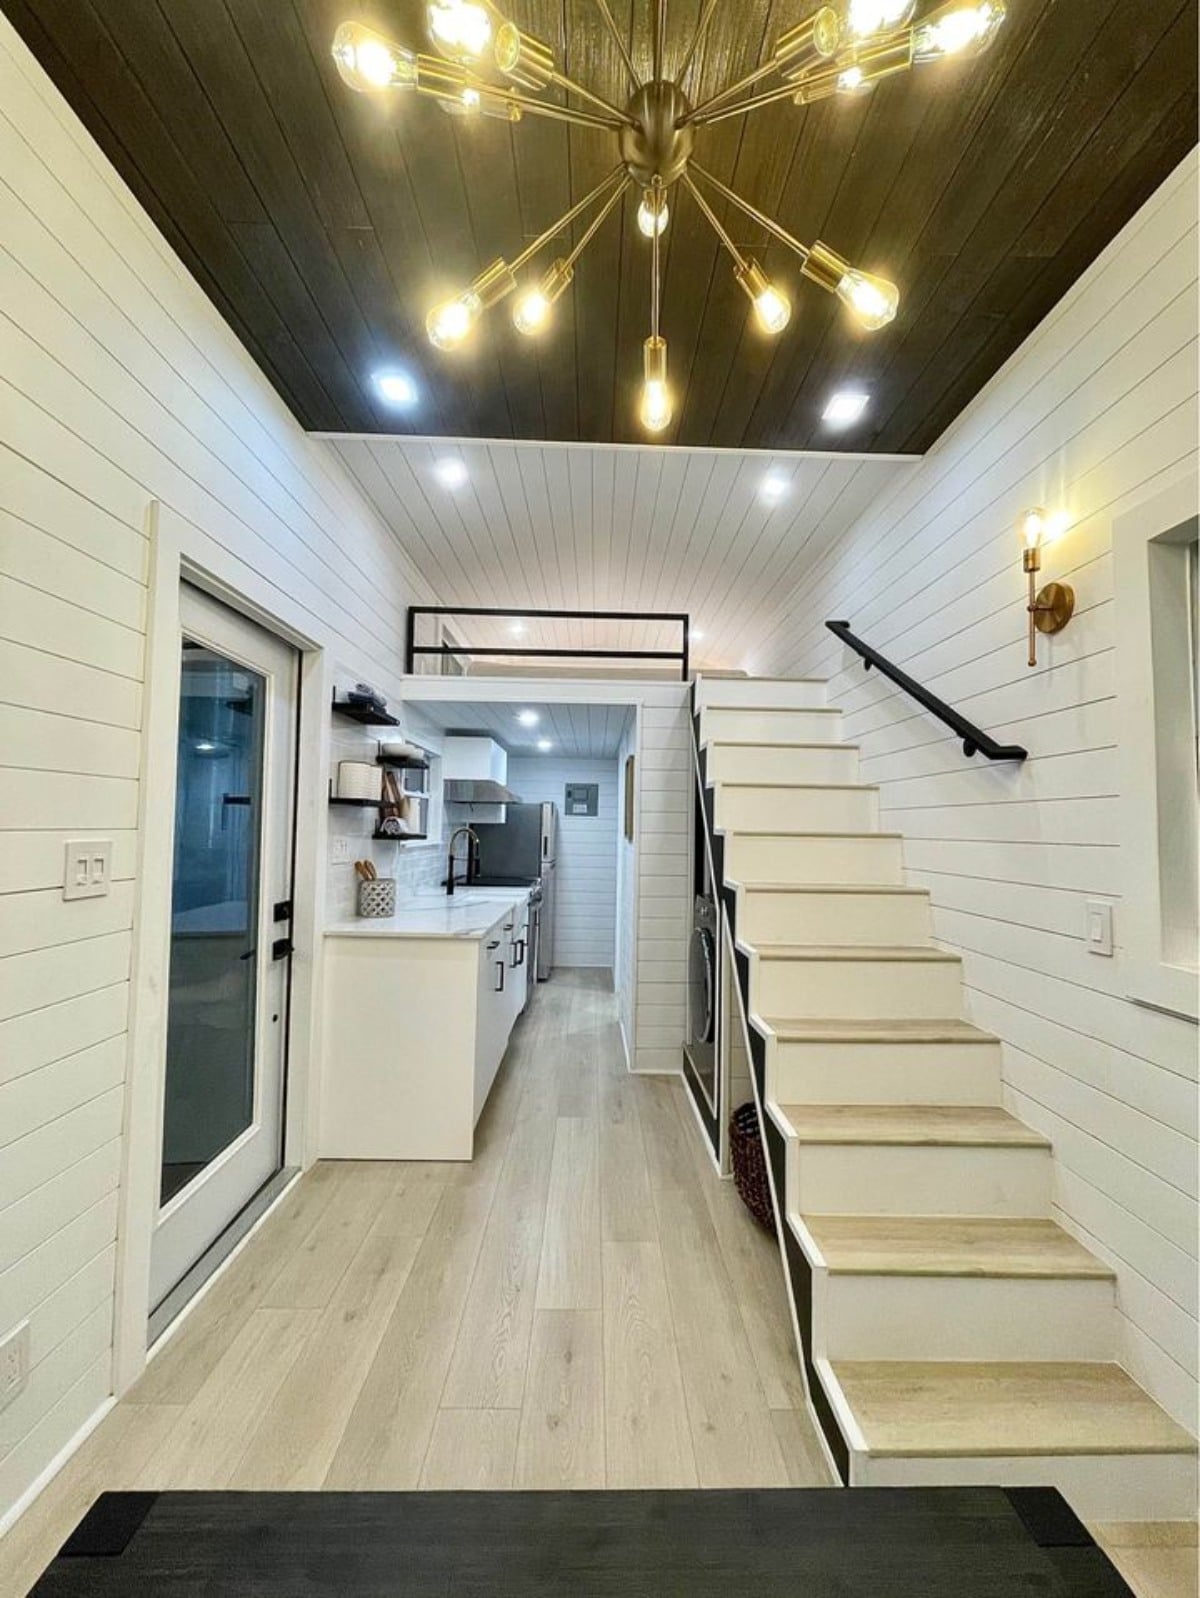 Kitchen area and stairs towards the bedroom of New 24' Luxury Tiny Home